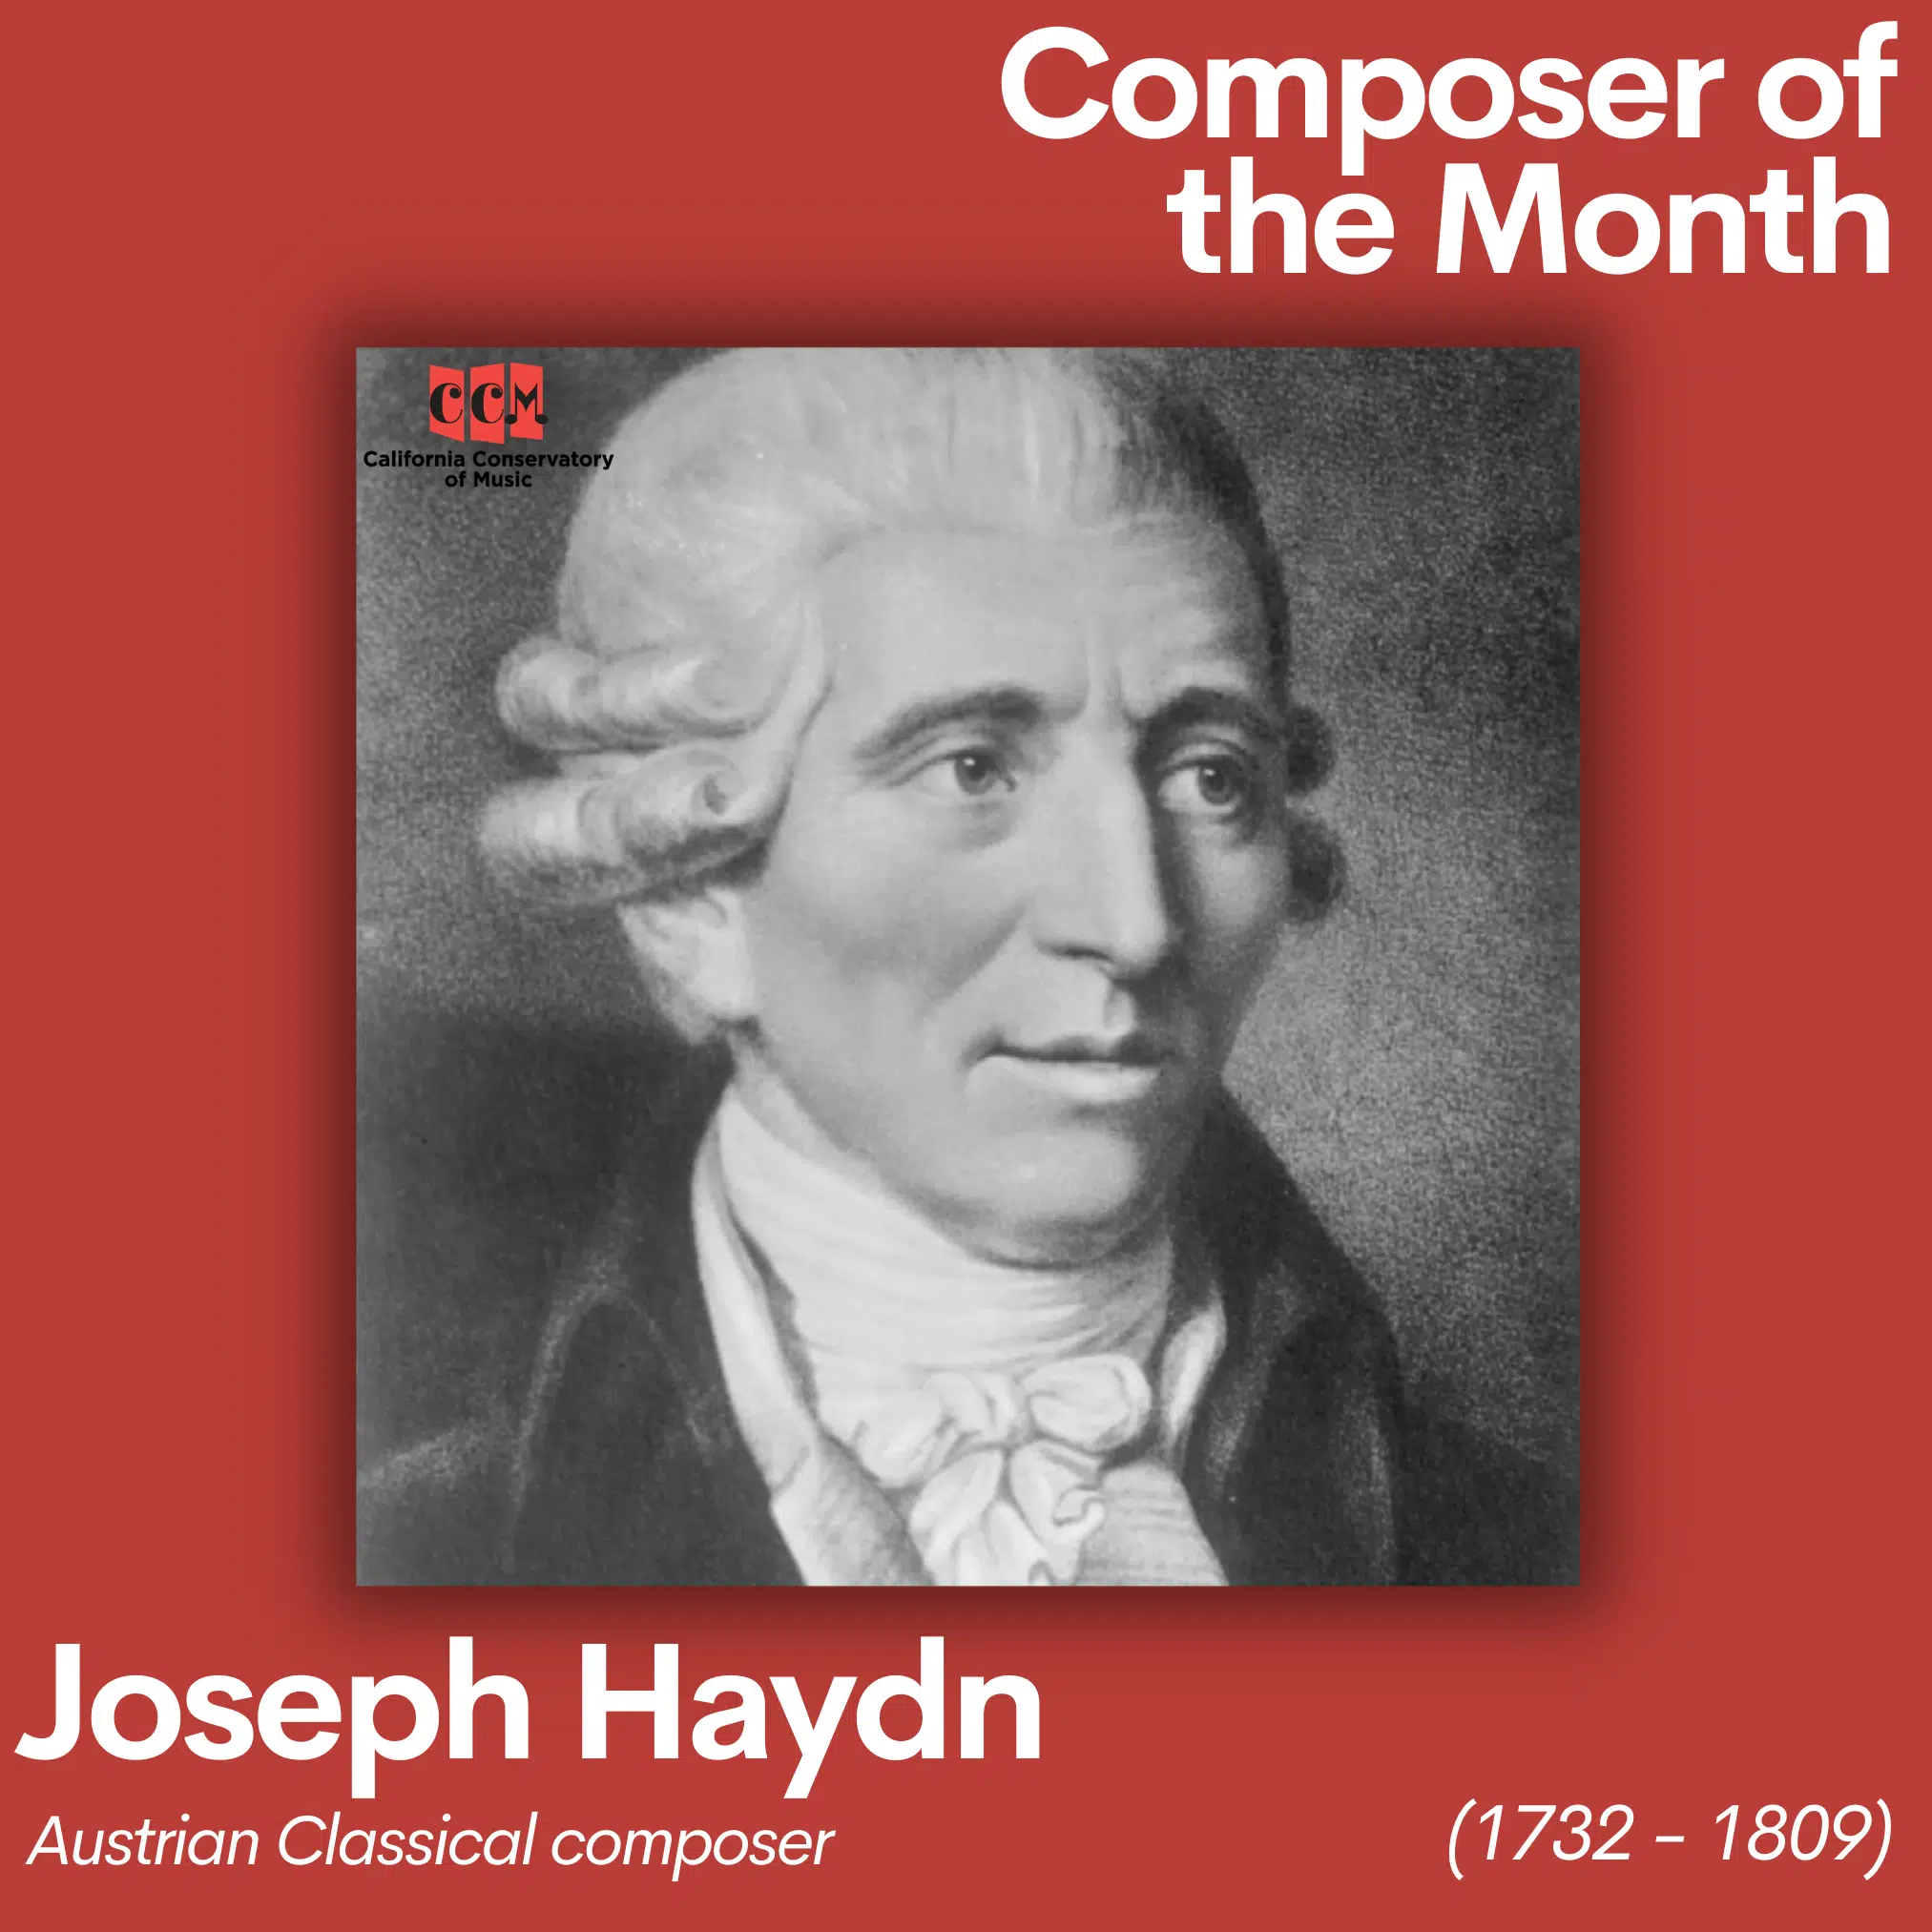 Joseph Haydn, the January Composer of the Month